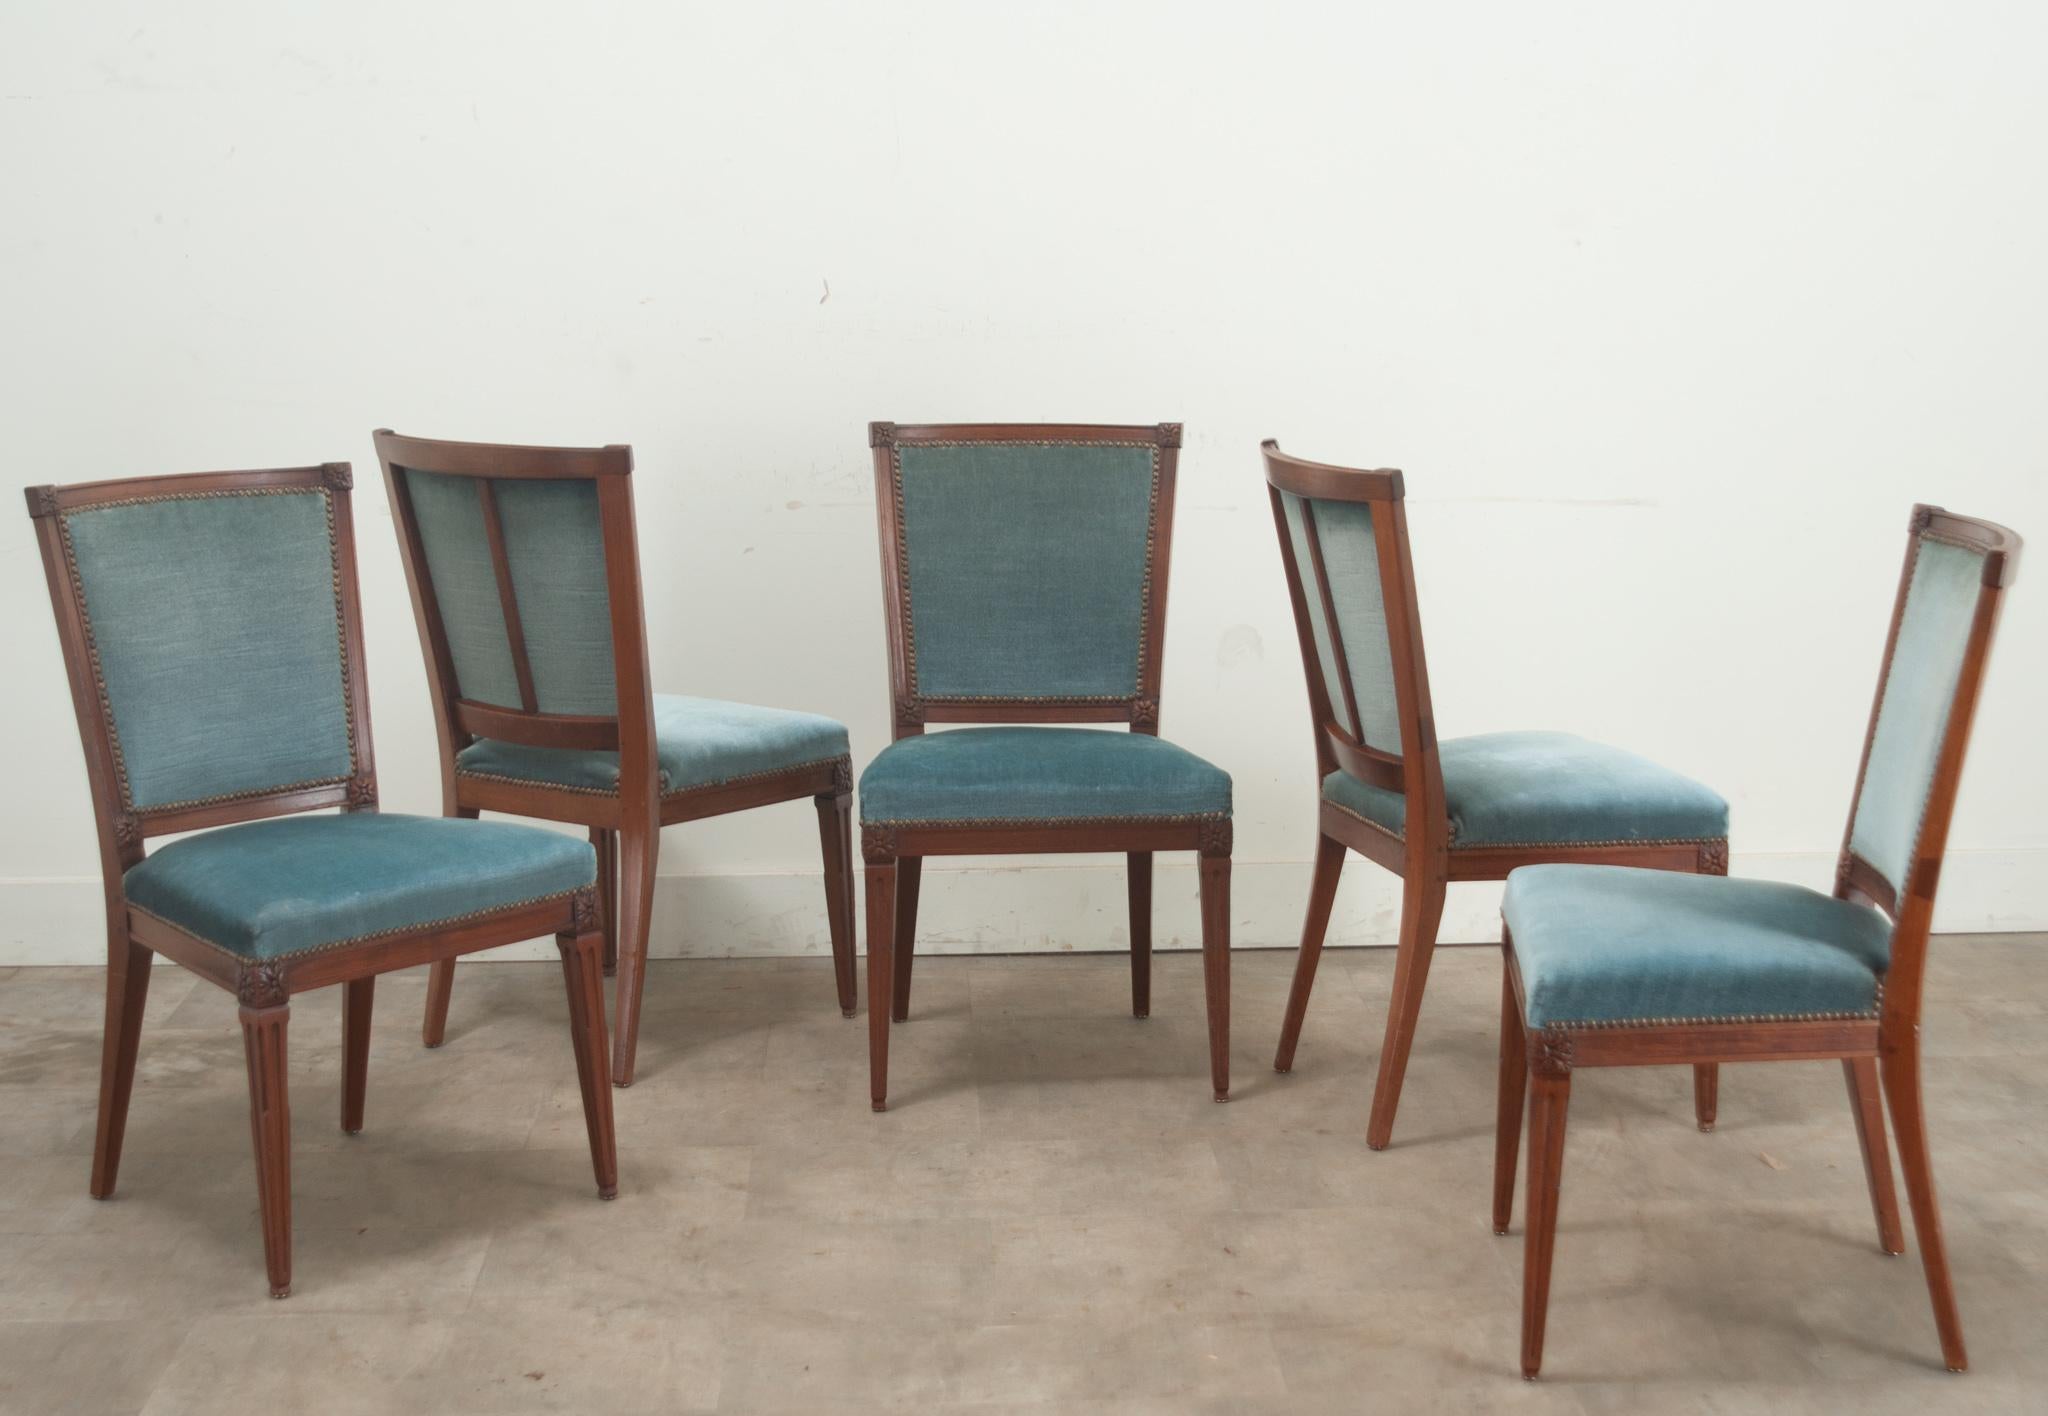 20th Century Set of 5 Louis XVI Style Dining Chairs